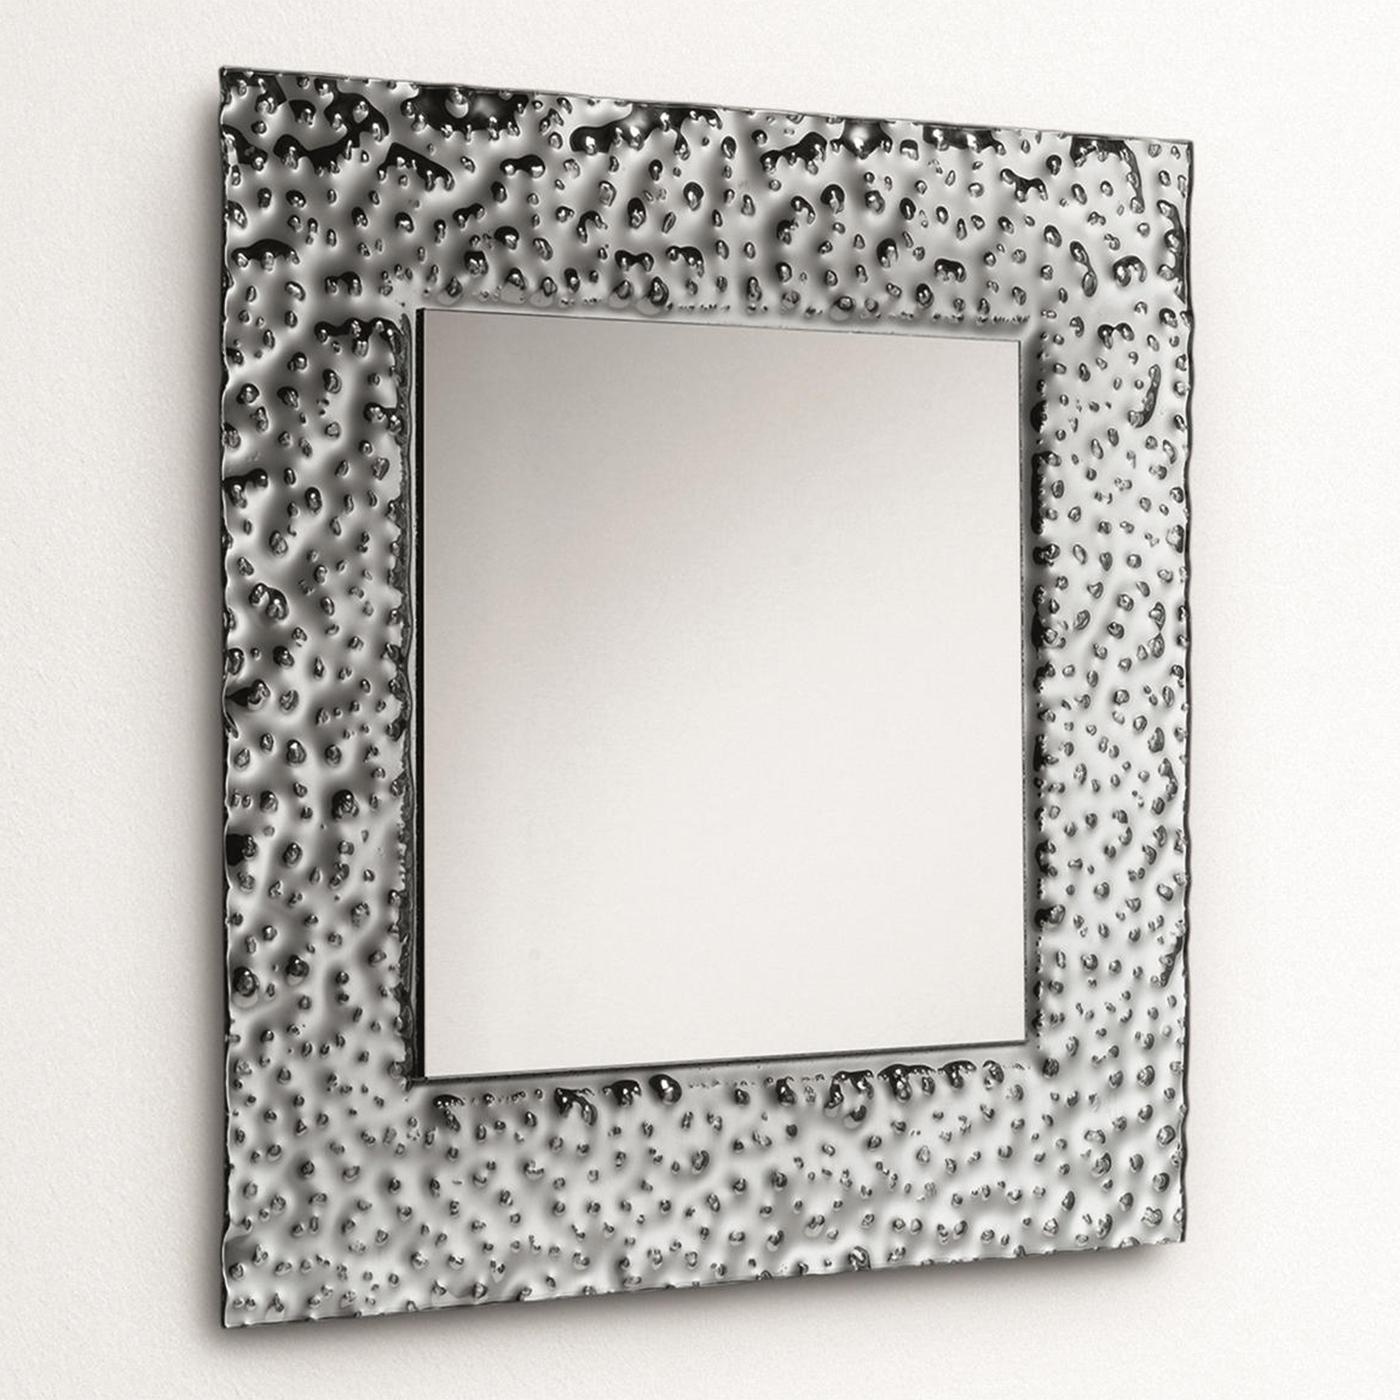 Mirror Mercury Square with fused glass frame with back-silvered,
8 mm thickness. With glass relief ornament on frame, rear frame in
painted metal. With square flat glass mirror, 5mm thickness.
It can be hung vertically or horizontally.